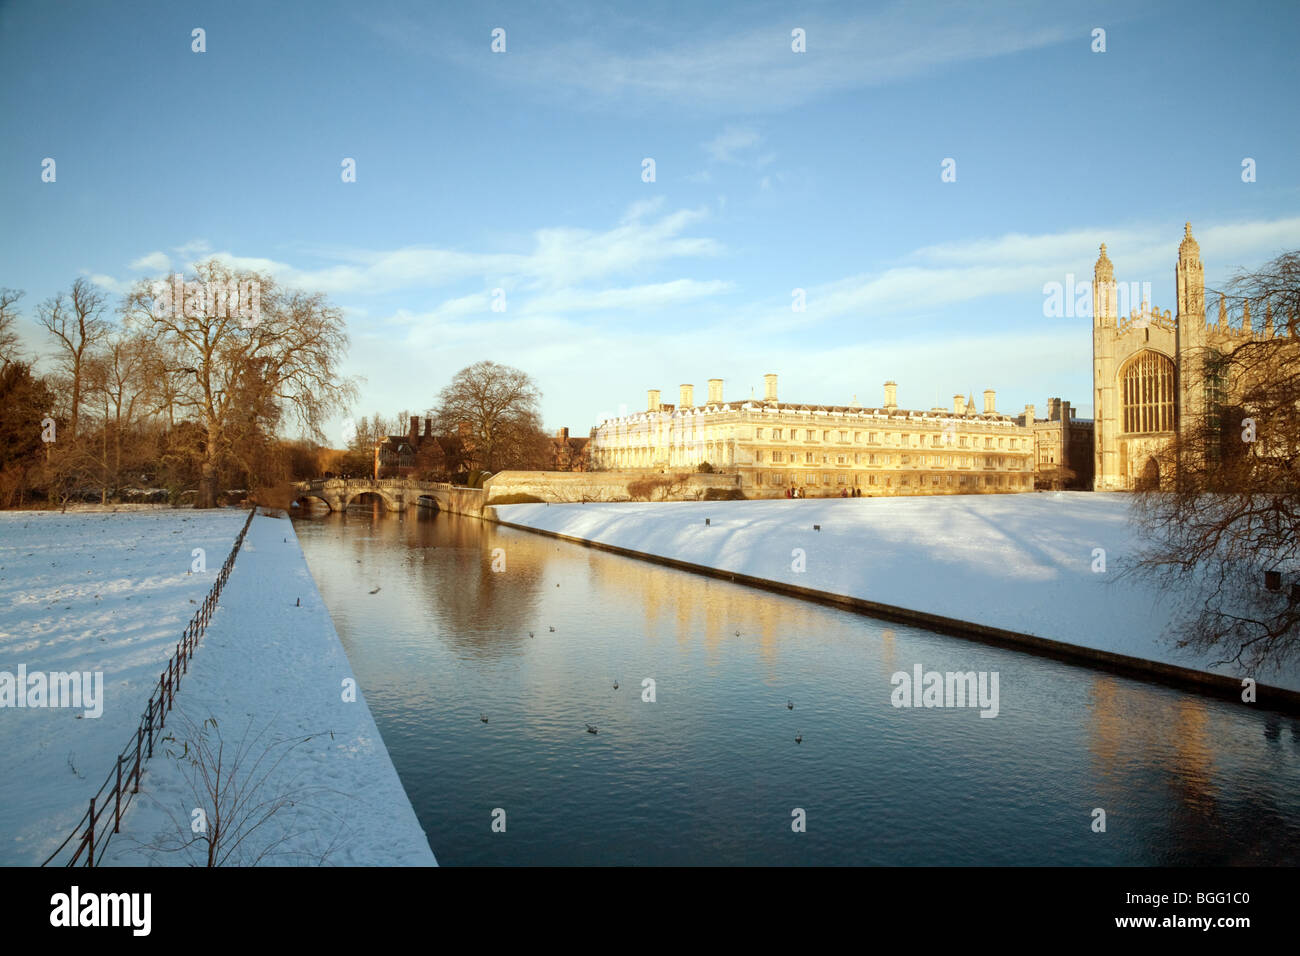 Kings College Chapel, Clare College and the River Cam in winter snow, cambridge university, UK Stock Photo